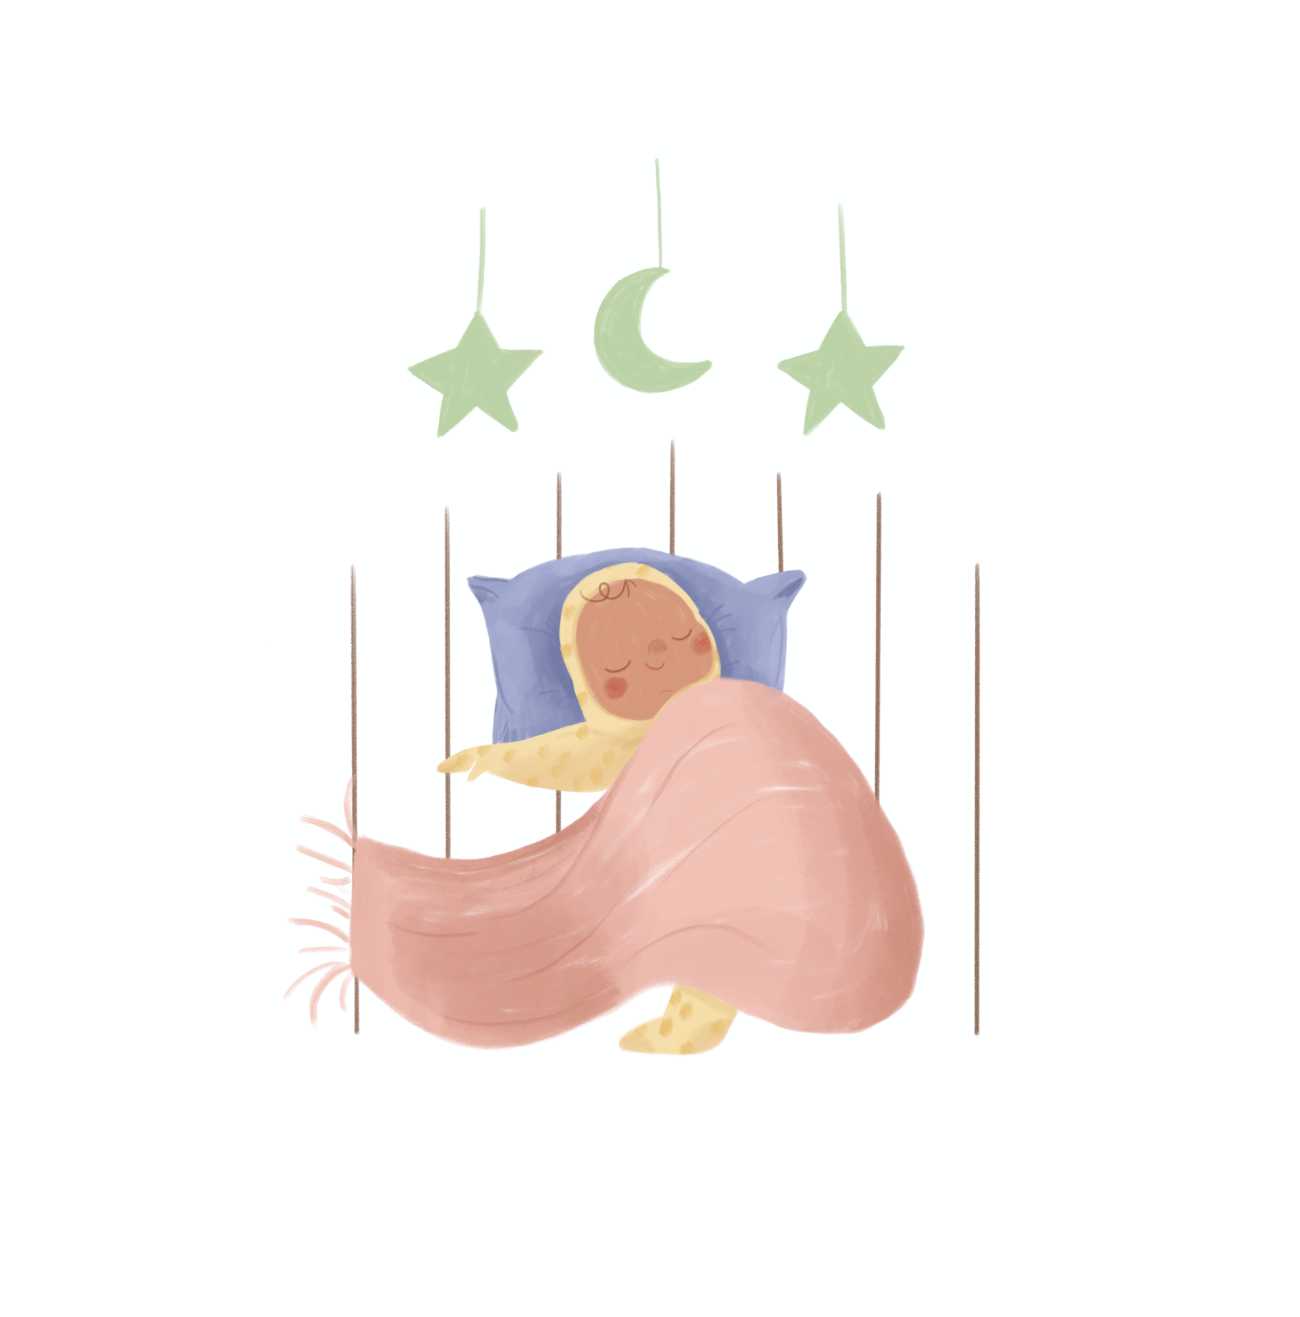 Bedtime stories Sleep Sweetly Little Light by Jade Maitre lullabies for children page 12